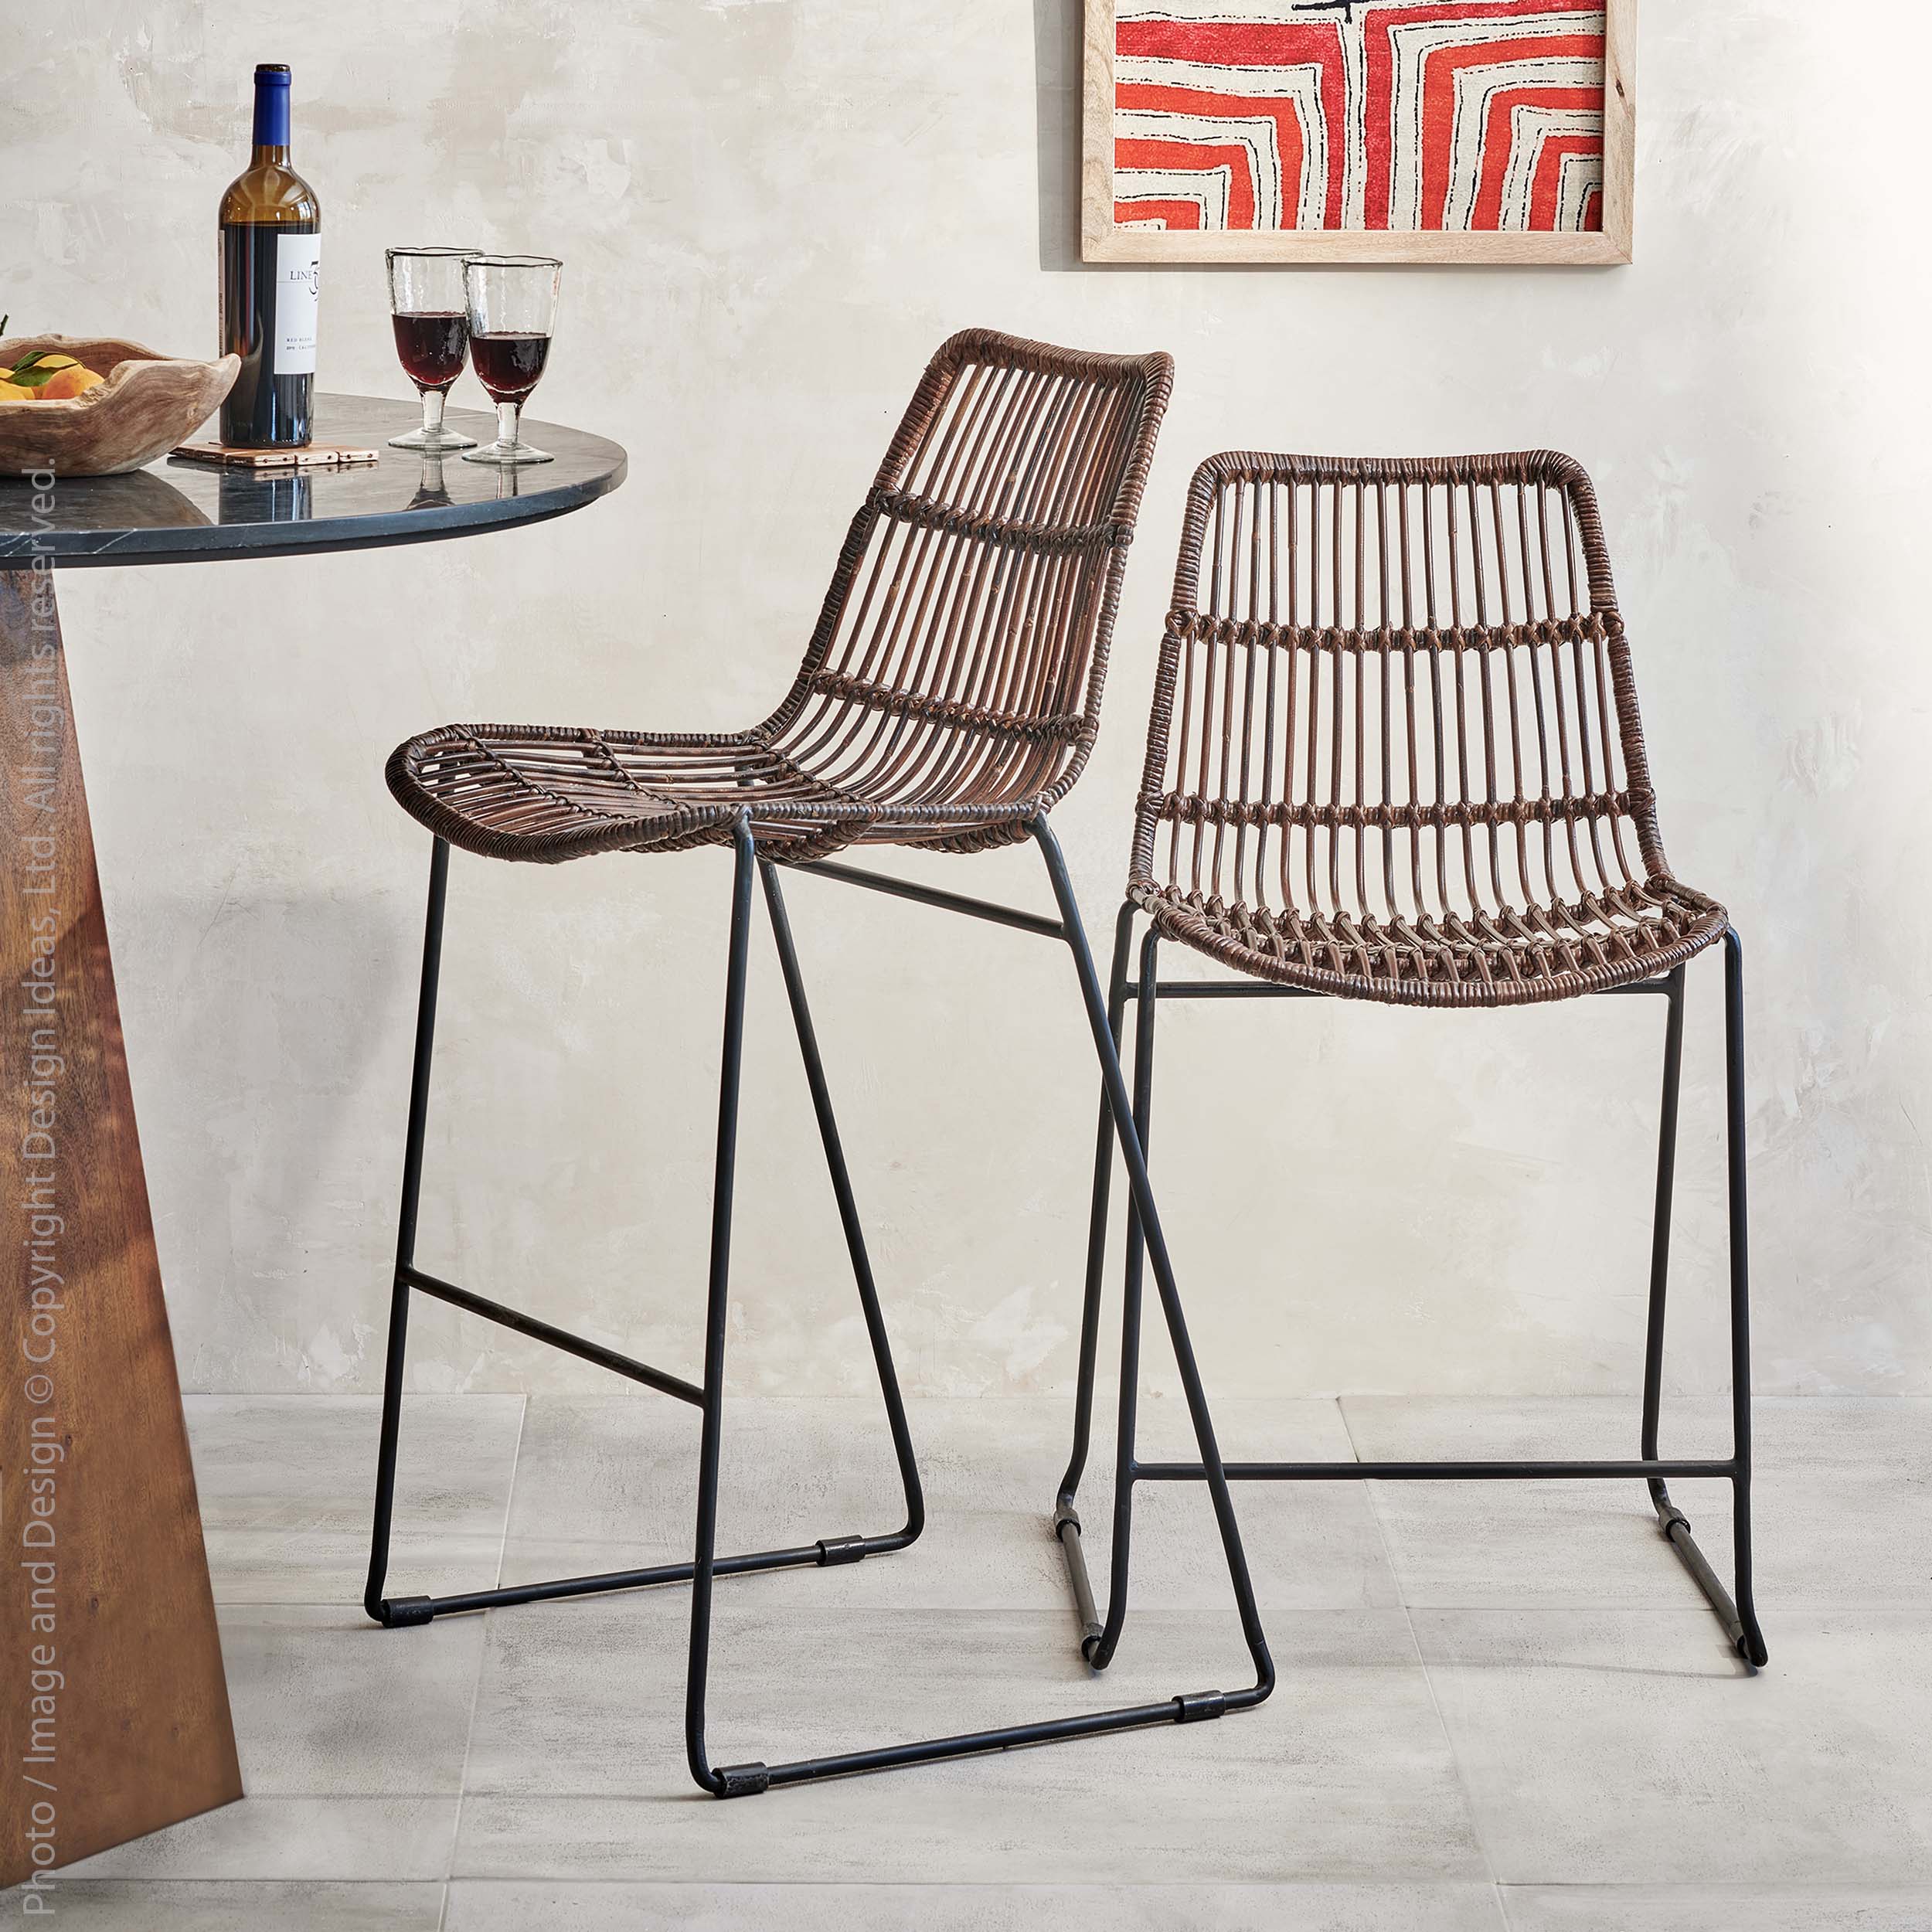 Brisbane™ Welded Iron and Woven Rattan and Steel Bar Stool - (colors: Natural) | Premium Stool from the Brisbane™ collection | made with Rattan and Steel for long lasting use